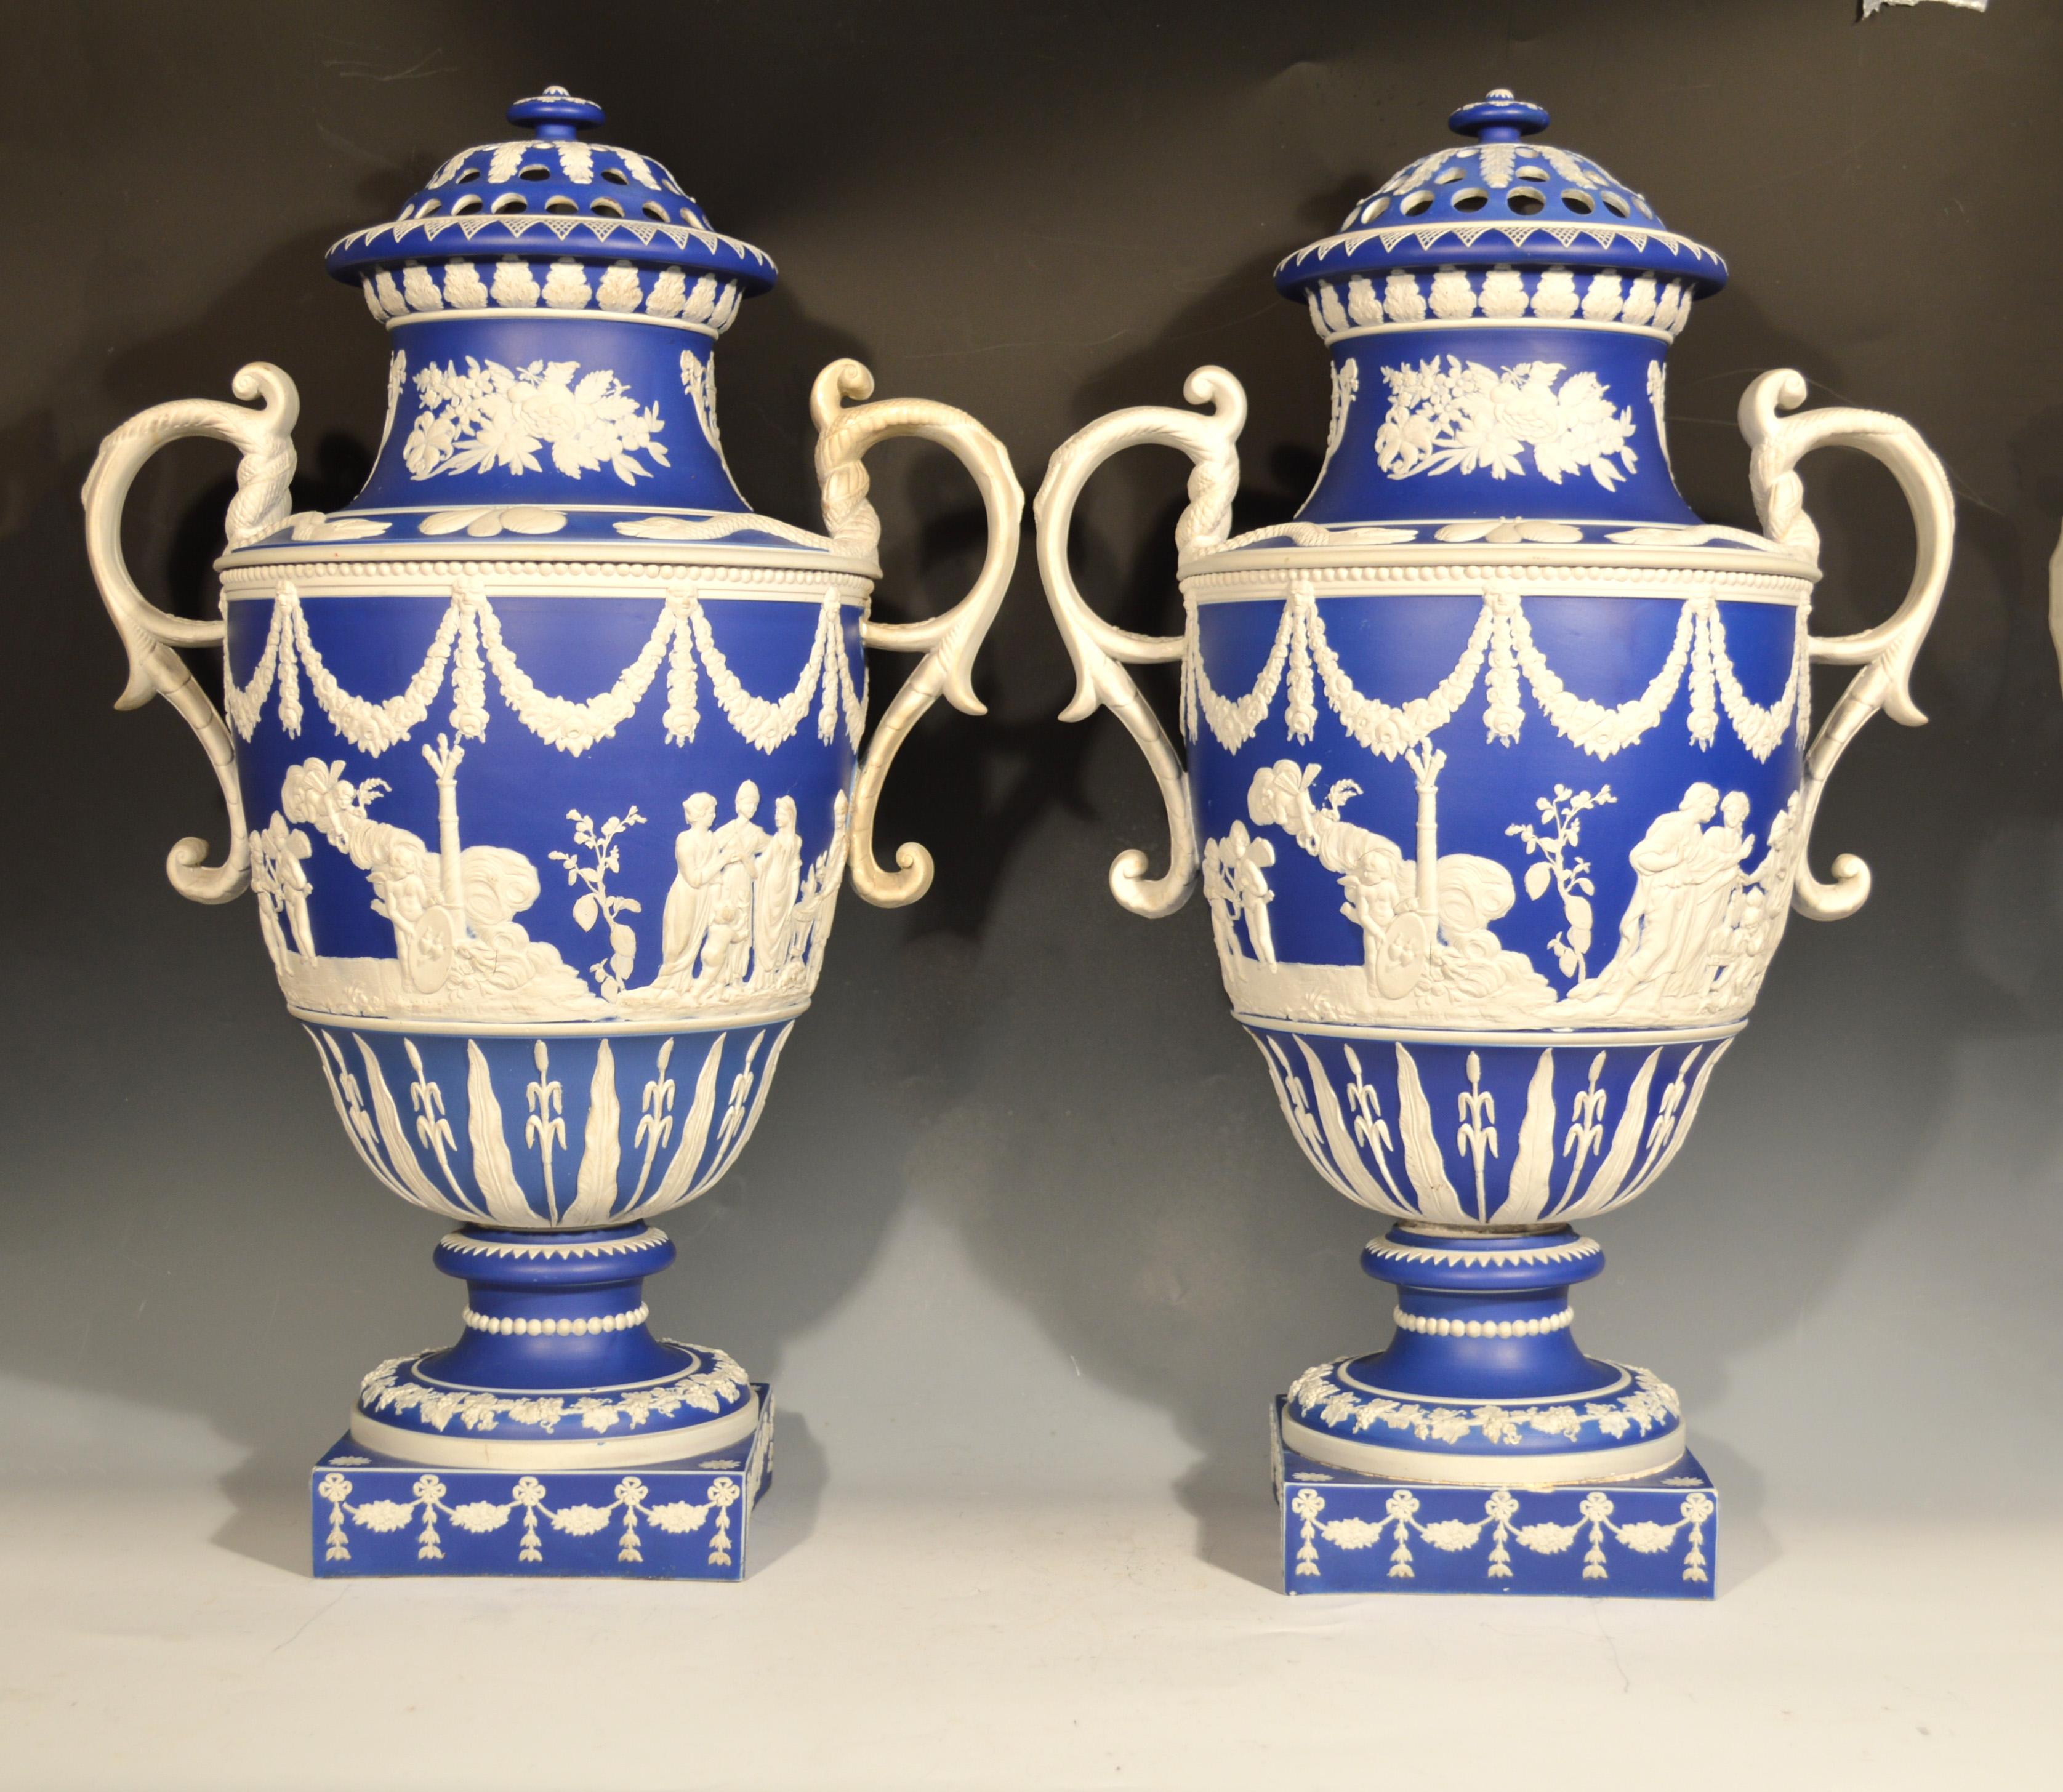 Pair of remarkable blue Jasper dipped sprigged stoneware vases and covers,
Attributed to Neale & Co.,
early 19th century.

The ornate footed vases with a blue ground and with sprigged decoration. The vases with white scrolled handles encircled